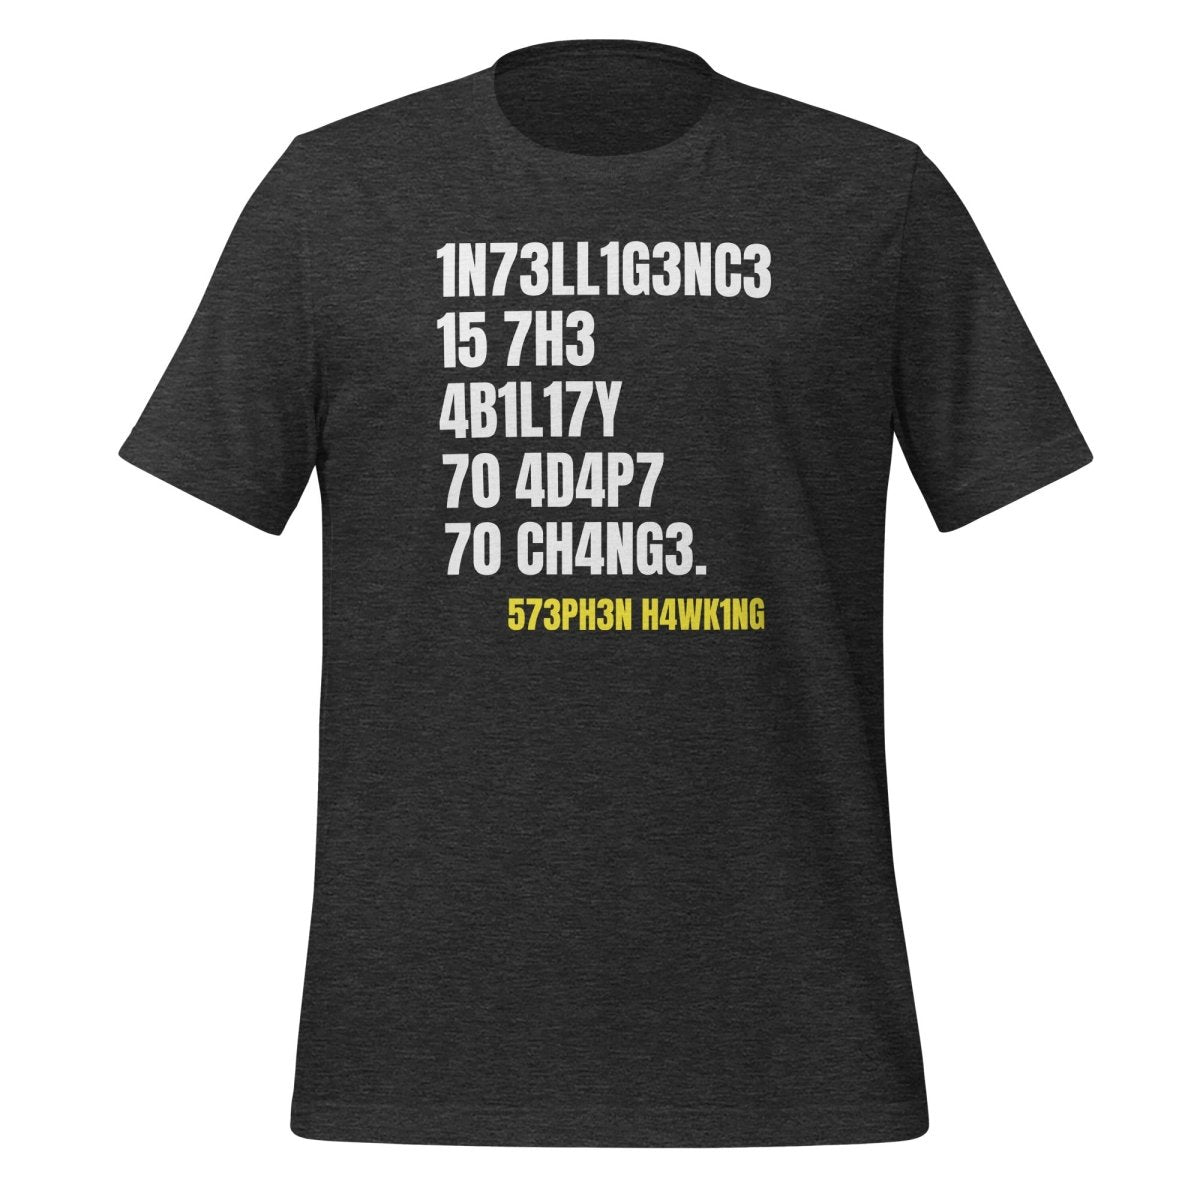 Intelligence is the Ability to Change T - Shirt (unisex) - Dark Grey Heather - AI Store